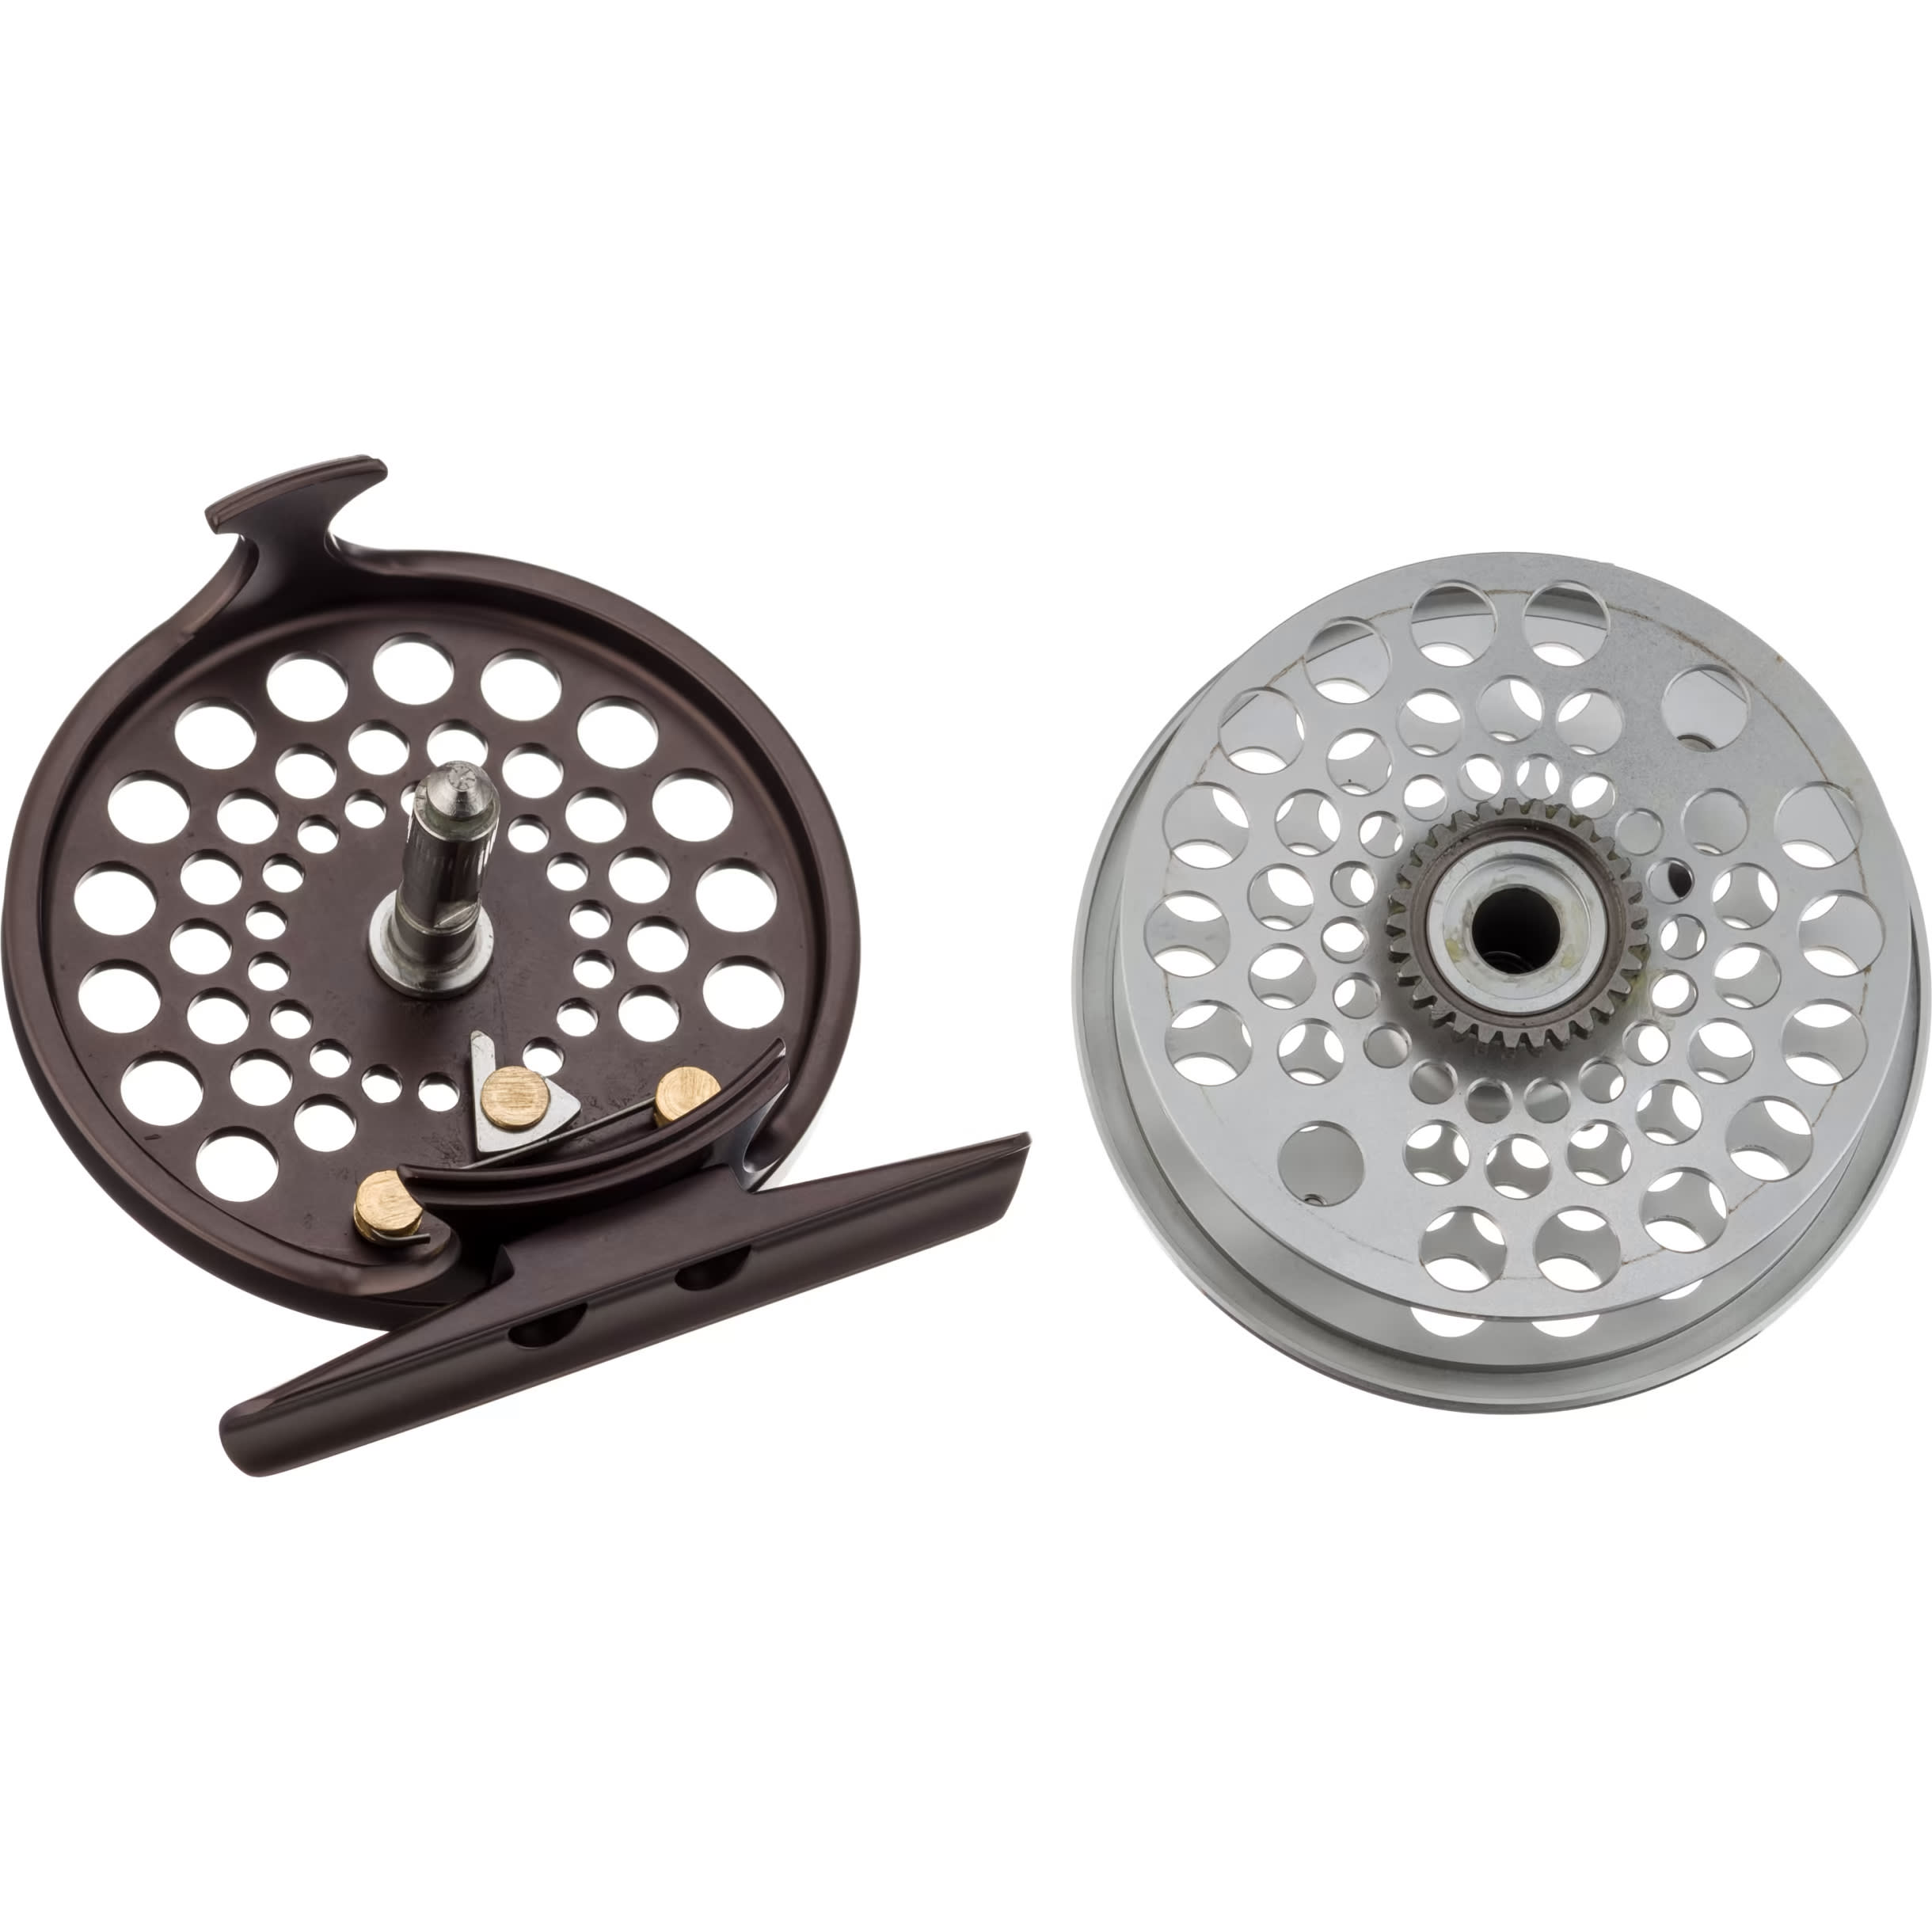 White River Fly Shop Lune Fly Reel - L3